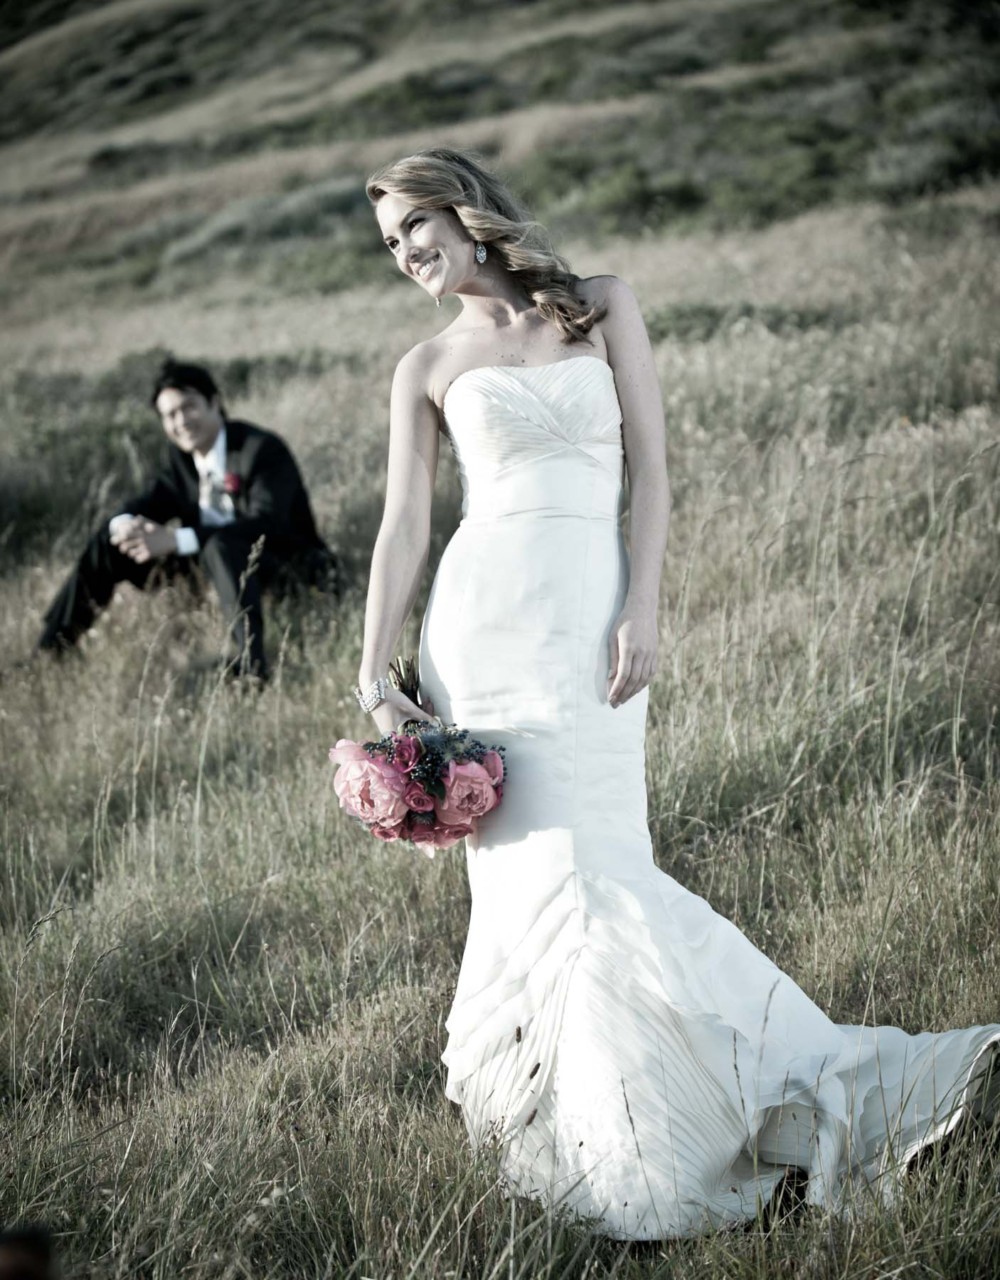 Looking for a affordable wedding photographer in Wasilla?